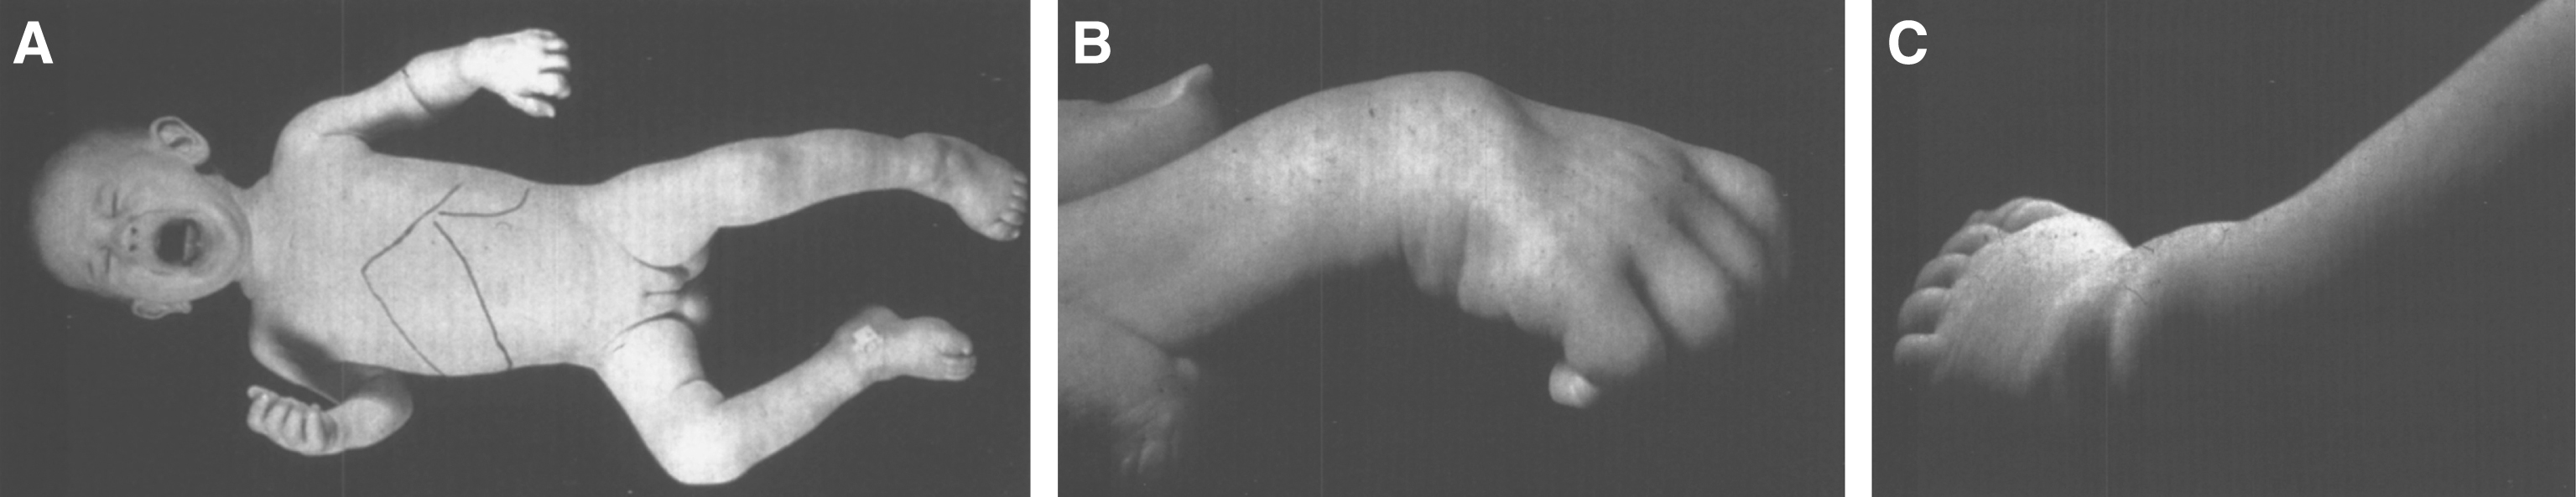 Farber disease. (A) Child with multiple skin nodules. (B) Large nodules on the wrist and (C) on the ankle. (Courtesy of Dr. Steven Qualman.).